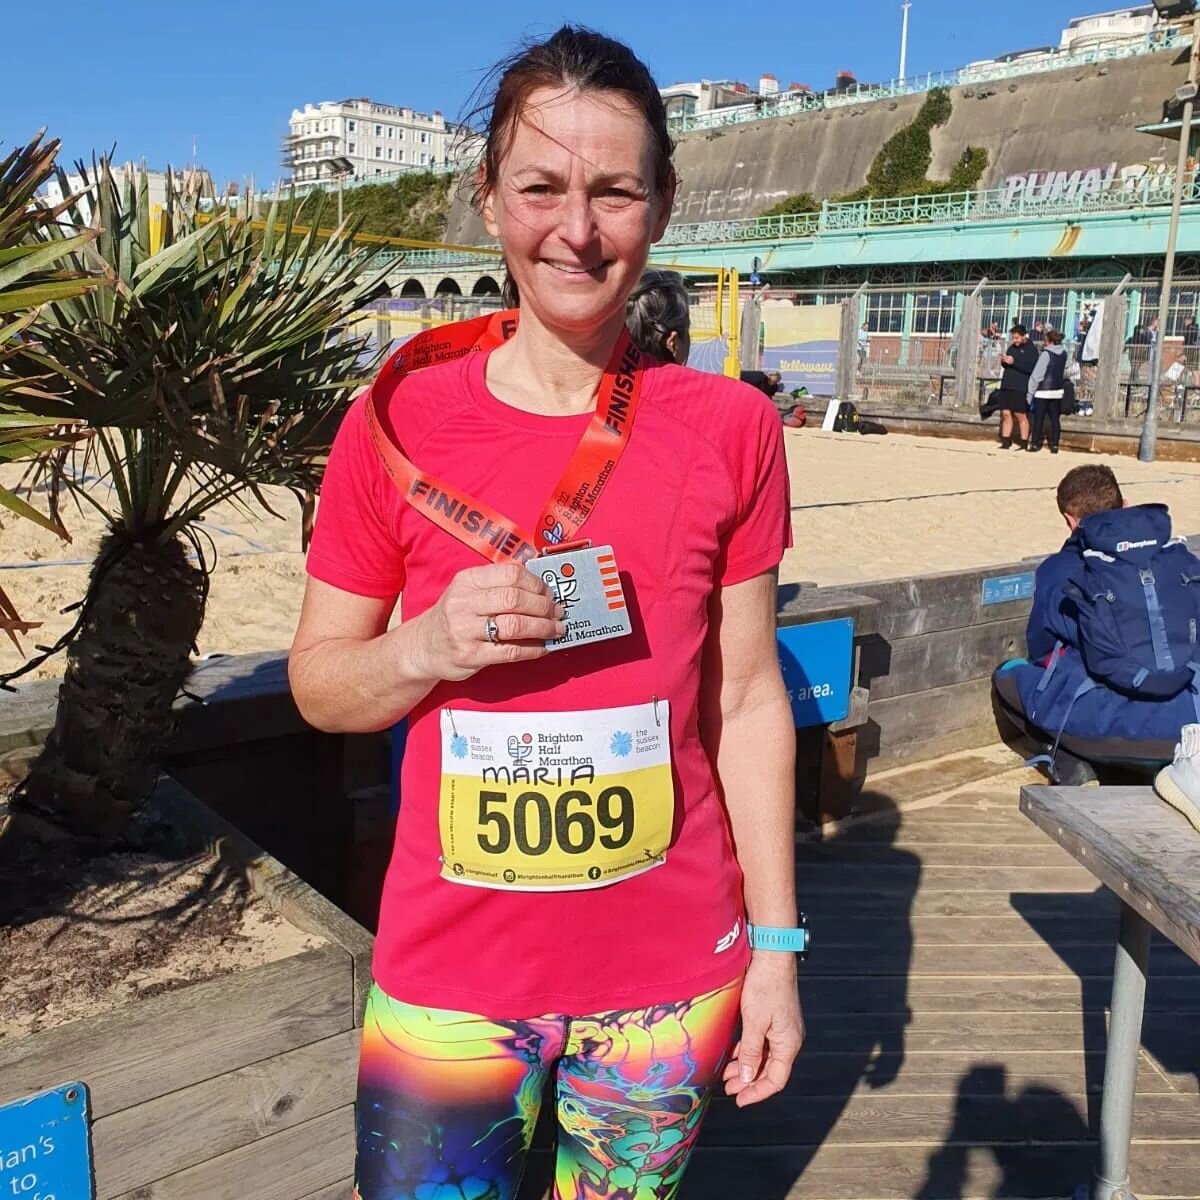 Congrats to my friend and client @mariaverney who is in the midst of training for @manchestermarathon . The Brighton half is tradition for her so we always make time for it in her training plans.
Despite a very windy last 5km she managed to get a Bri